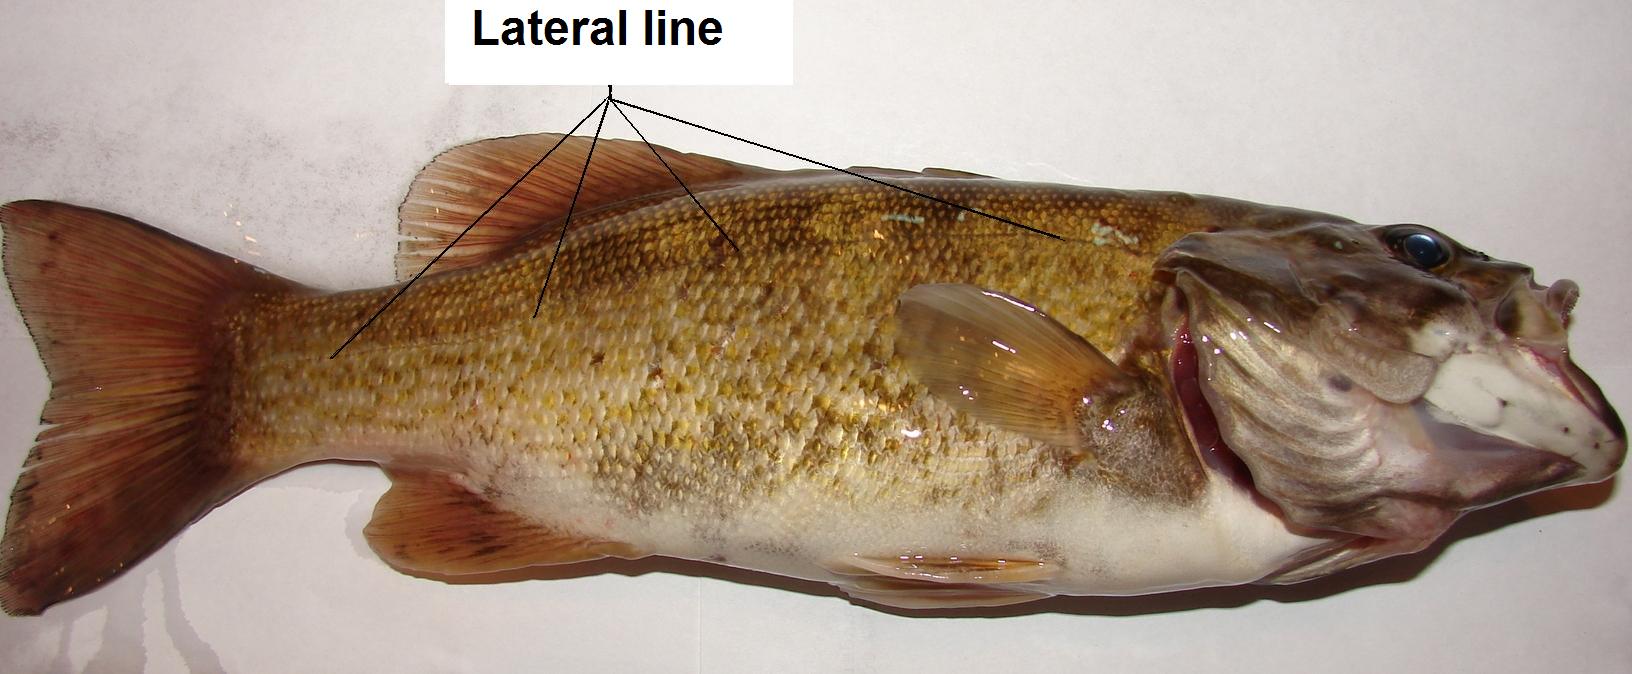 The smallmouth's lateral line; I took this photo prior to dissection